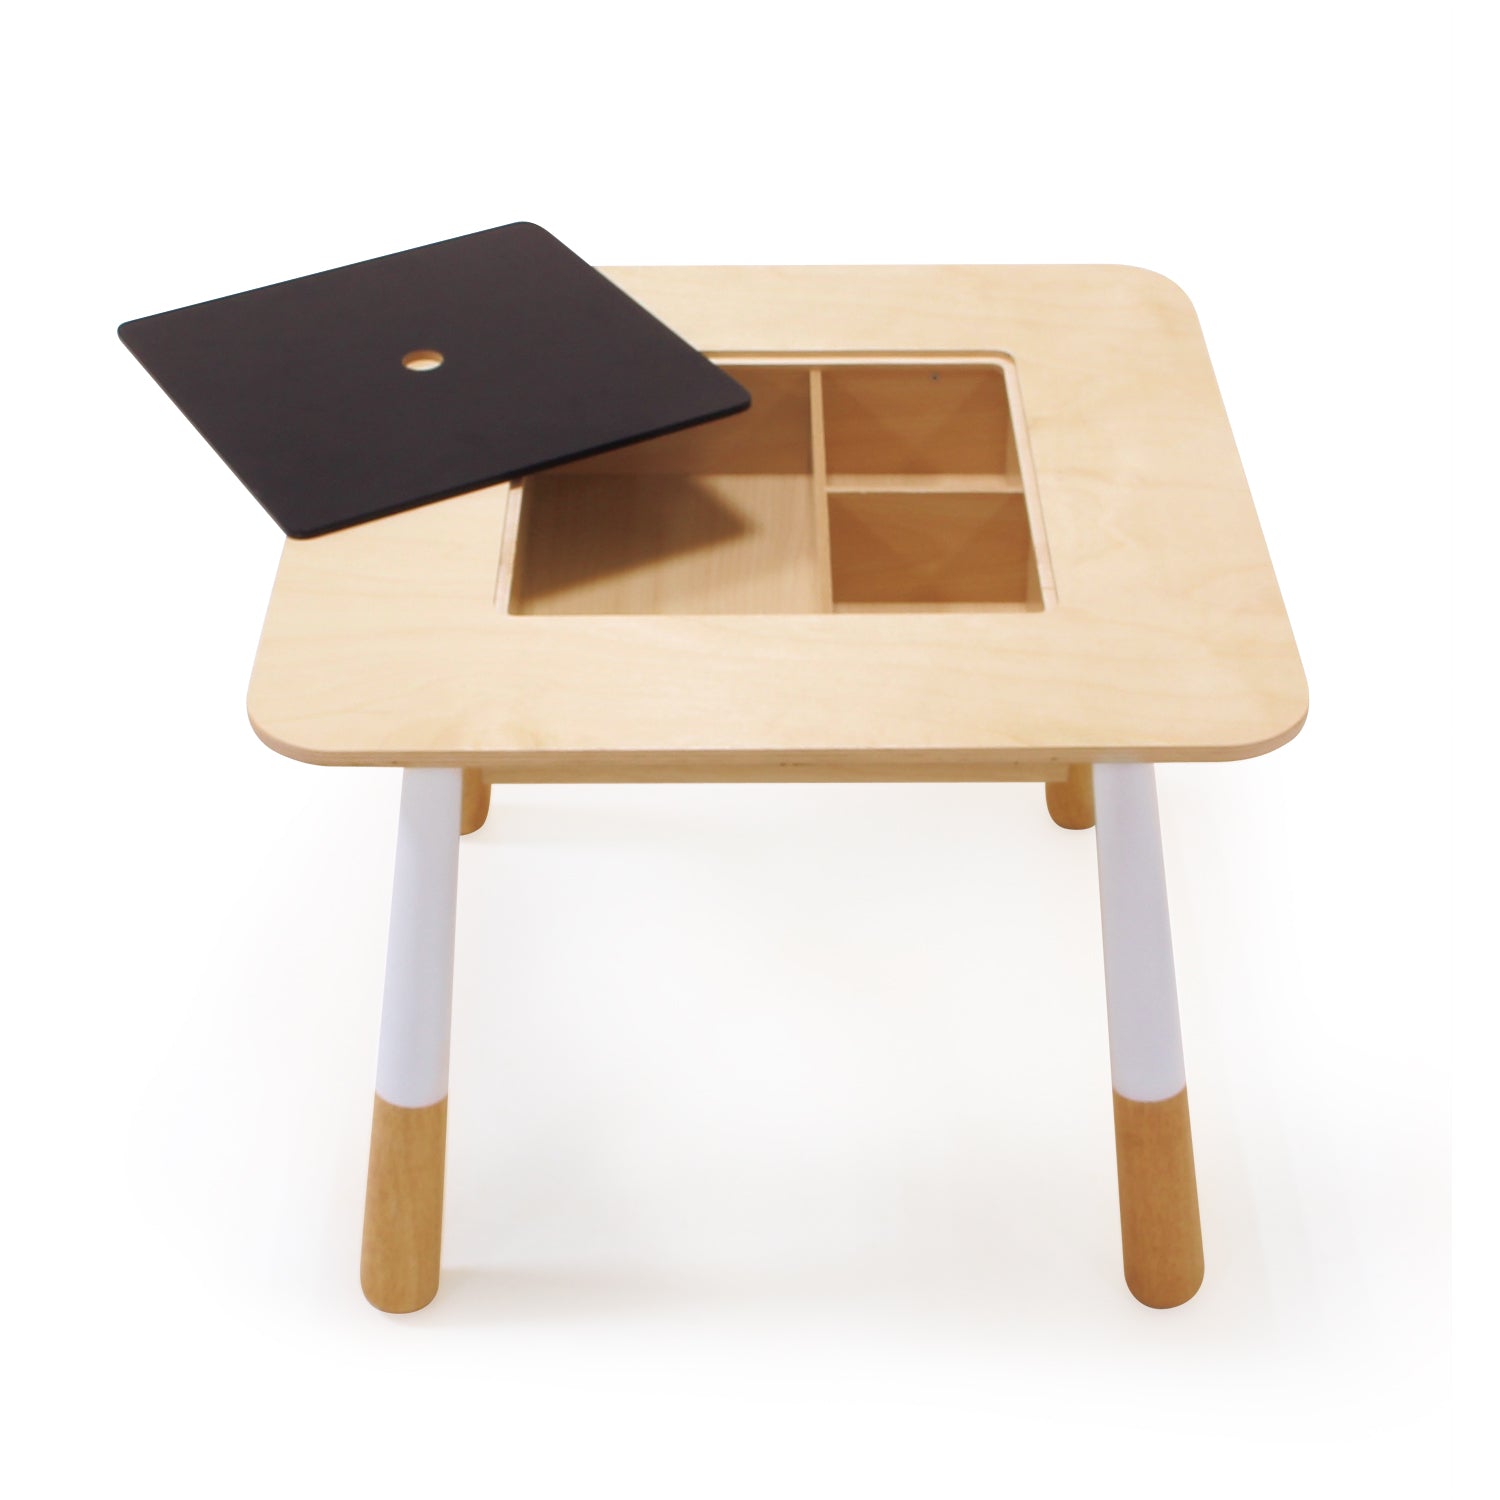 <p>A sturdy plywood and rubberwood childrens table with a removable chalkboard central panel. When the panel is removed, it reveals a hidden compartment to store pencils etc. Chalk not provided, recommended traditional non permanent chalk. </p>
<p><strong>Self assembly required.</strong> </p>
<p>Age range: 3 Years And Older  </p>
<p>Product 22.05 x 22.05 x 17.6”  </p>
<p>Weight: 14.52 lbs</p>
